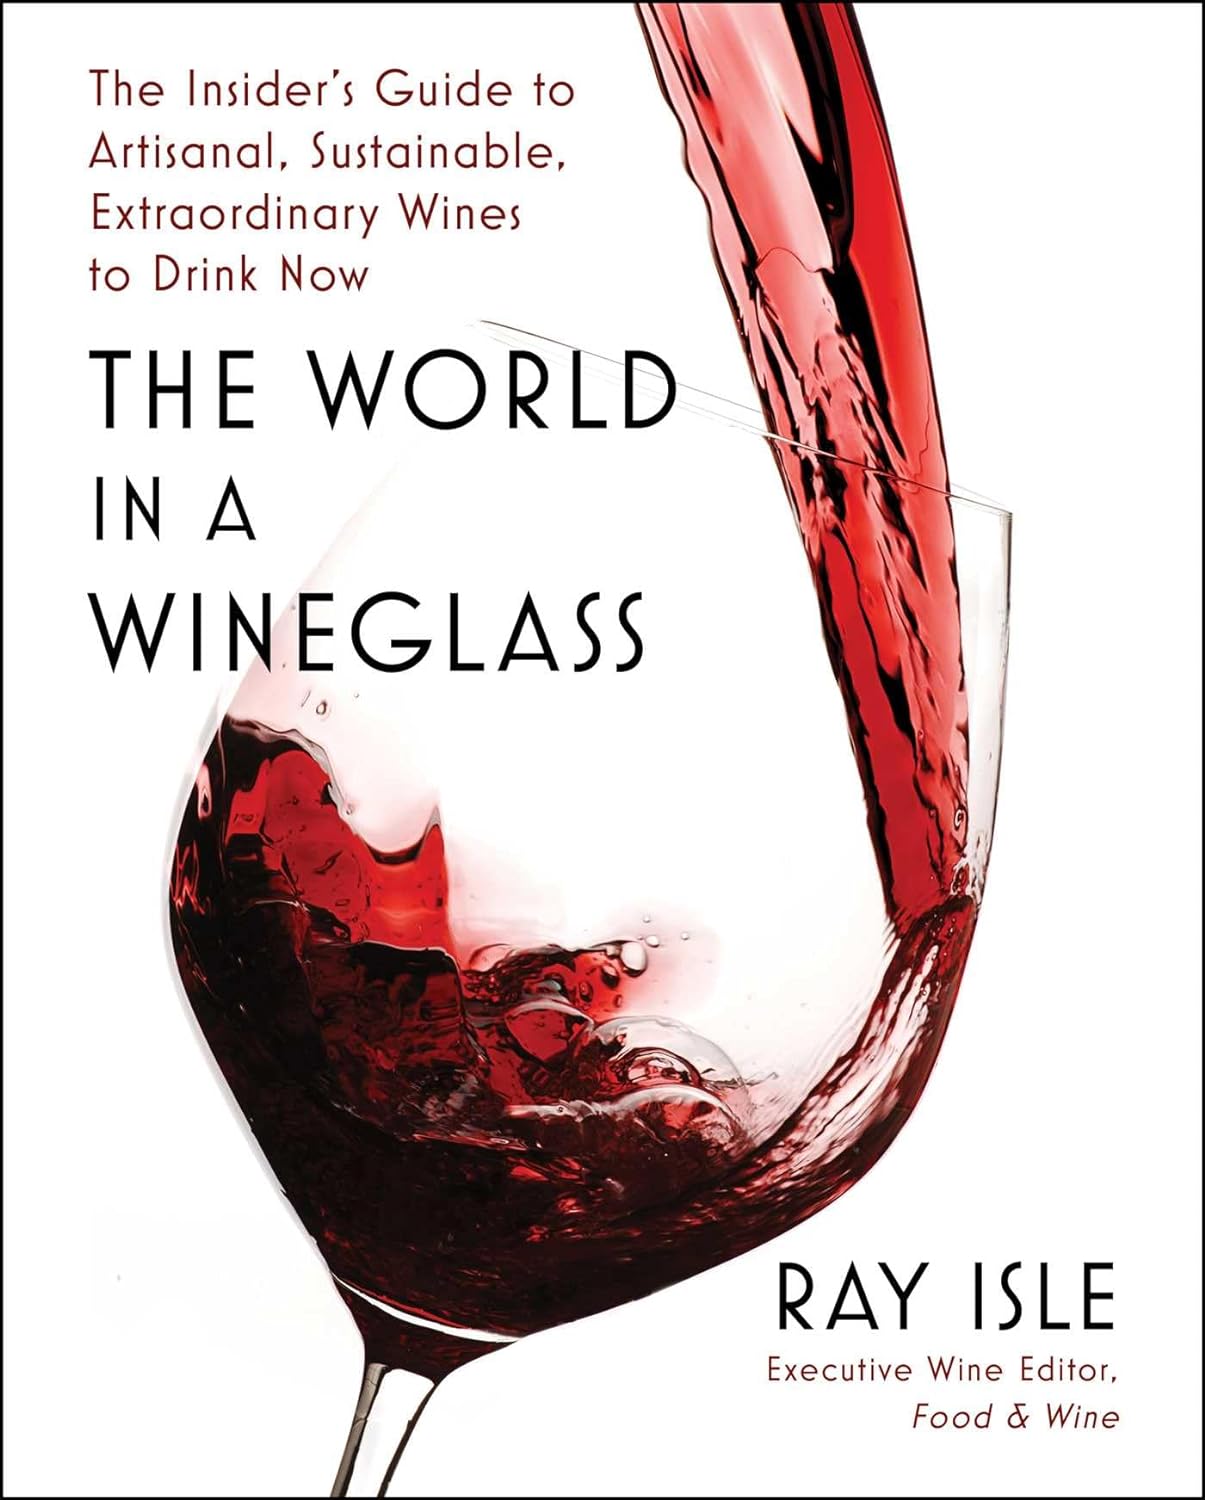 THE WORLD IN A WINEGLASS: THE INSIDER'S GUIDE TO ARTISANAL, SUSTAINABLE, EXTRAORDINARY WINES TO